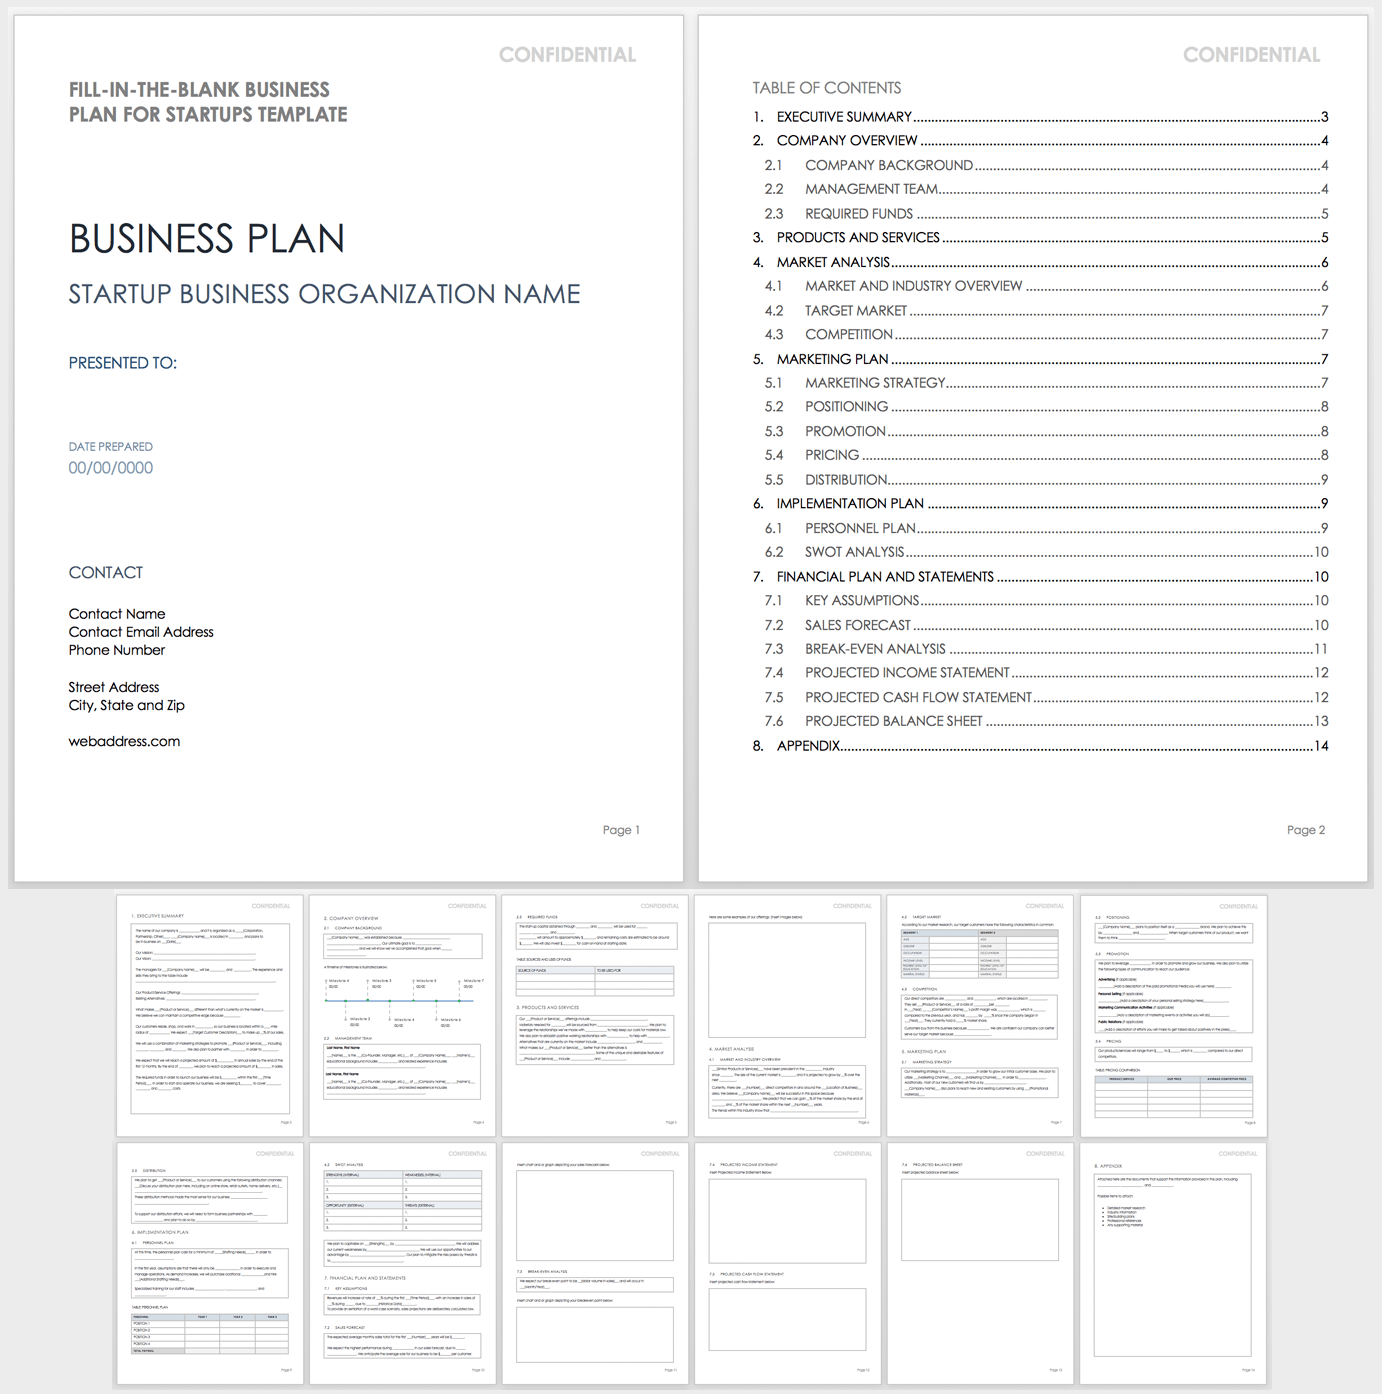 Fill in the Blank Business Plan Startups Template